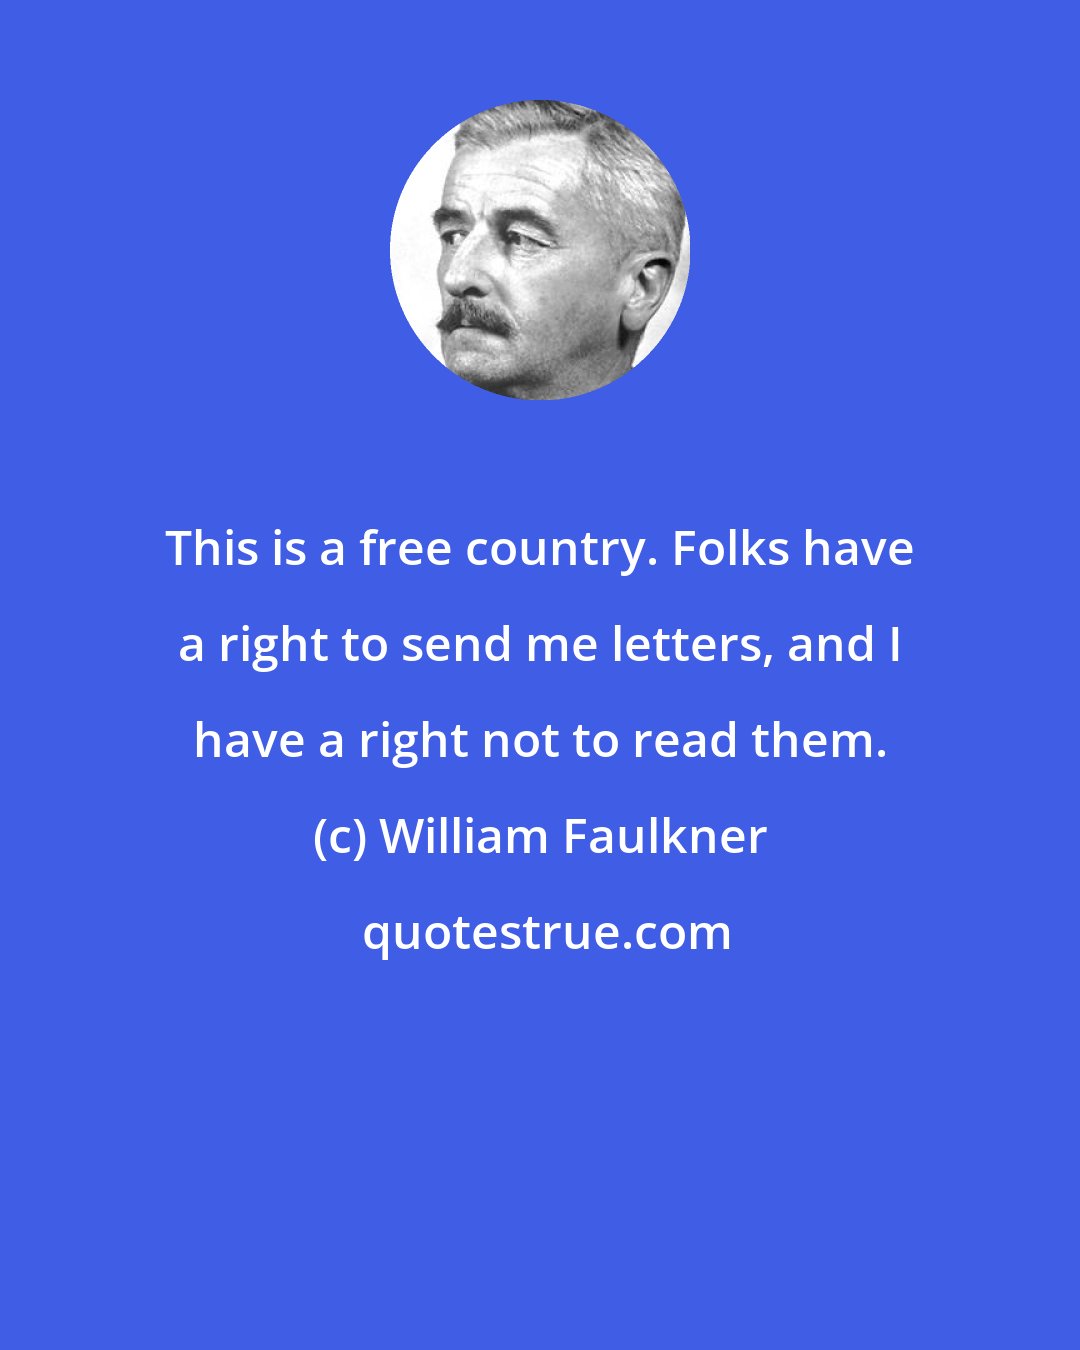 William Faulkner: This is a free country. Folks have a right to send me letters, and I have a right not to read them.